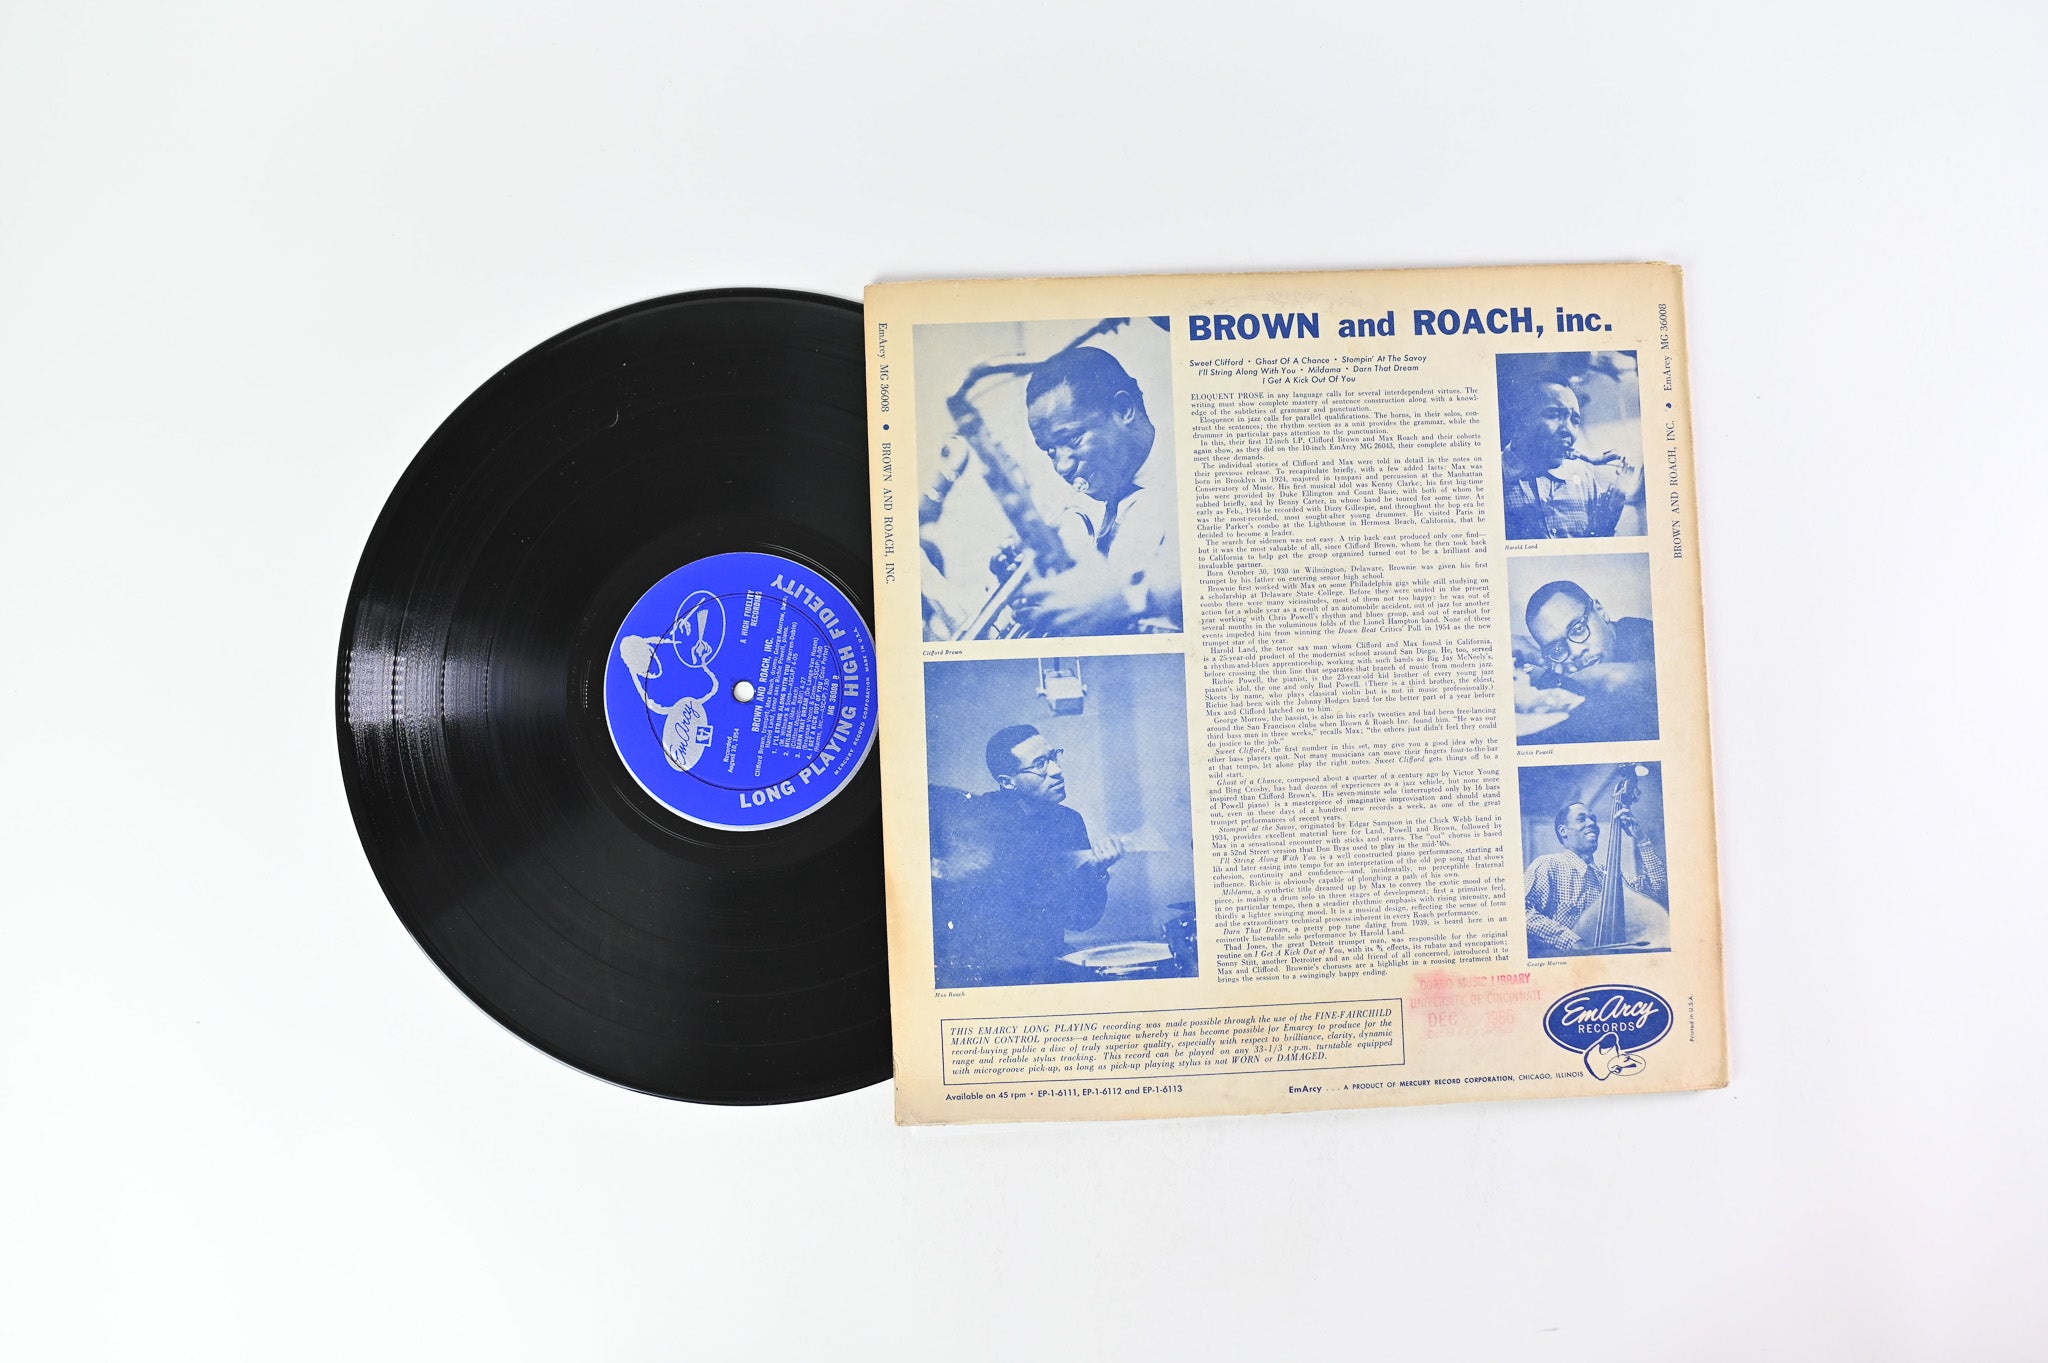 Clifford Brown And Max Roach - Brown And Roach Incorporated on Emarcy Mono Deep Groove Blue Back